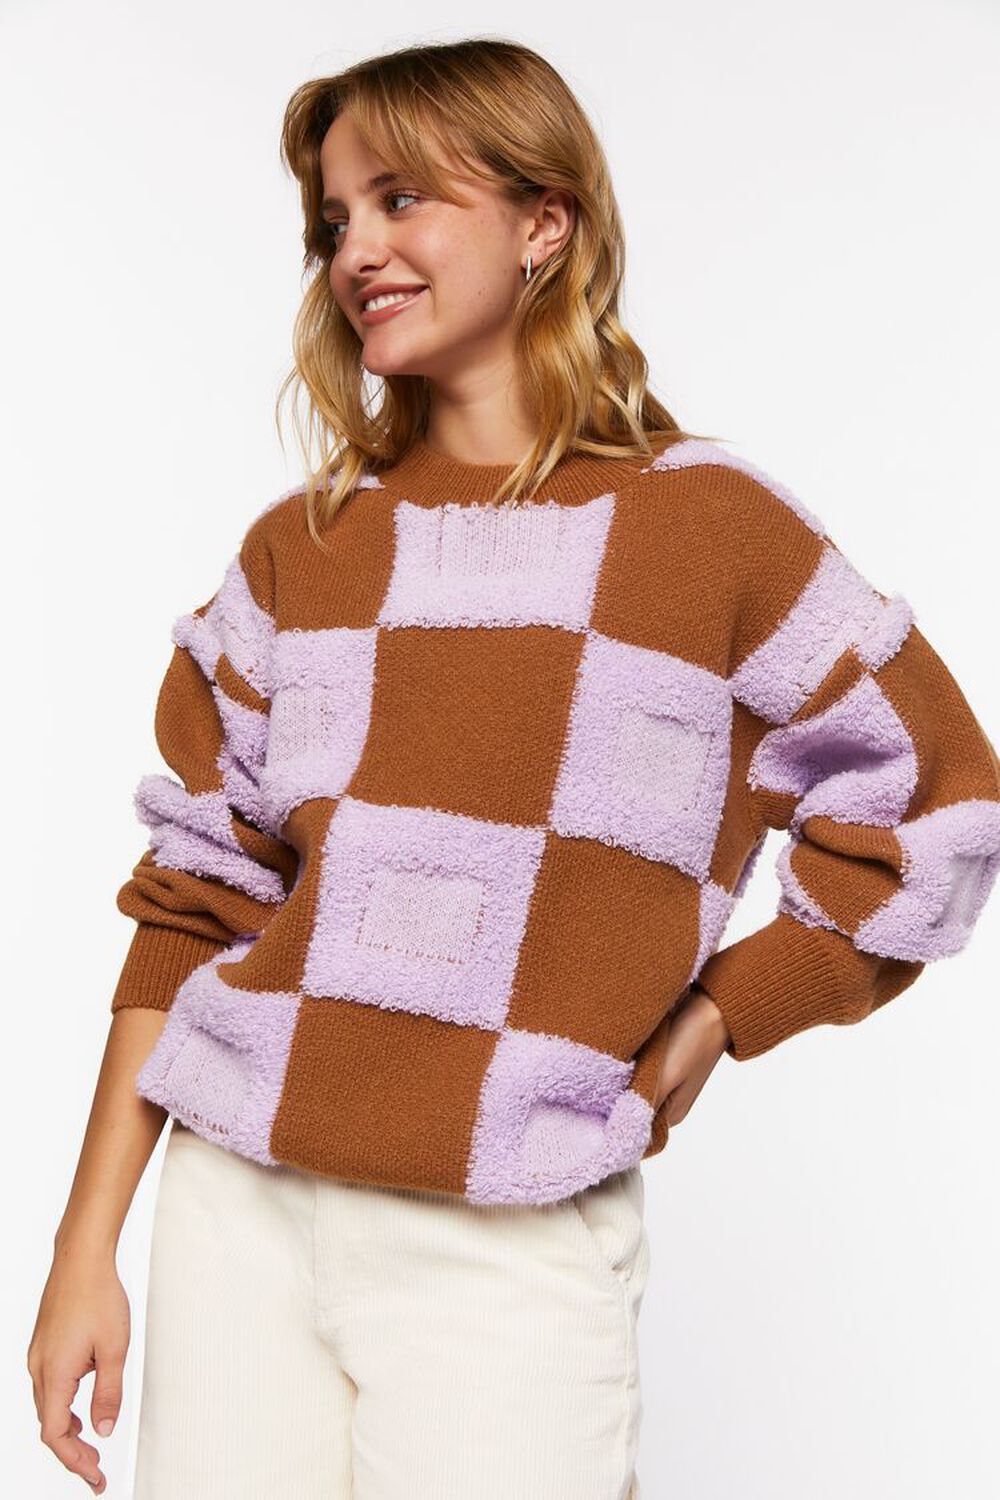 PURPLE/BROWN Fuzzy Checkered Sweater, image 2